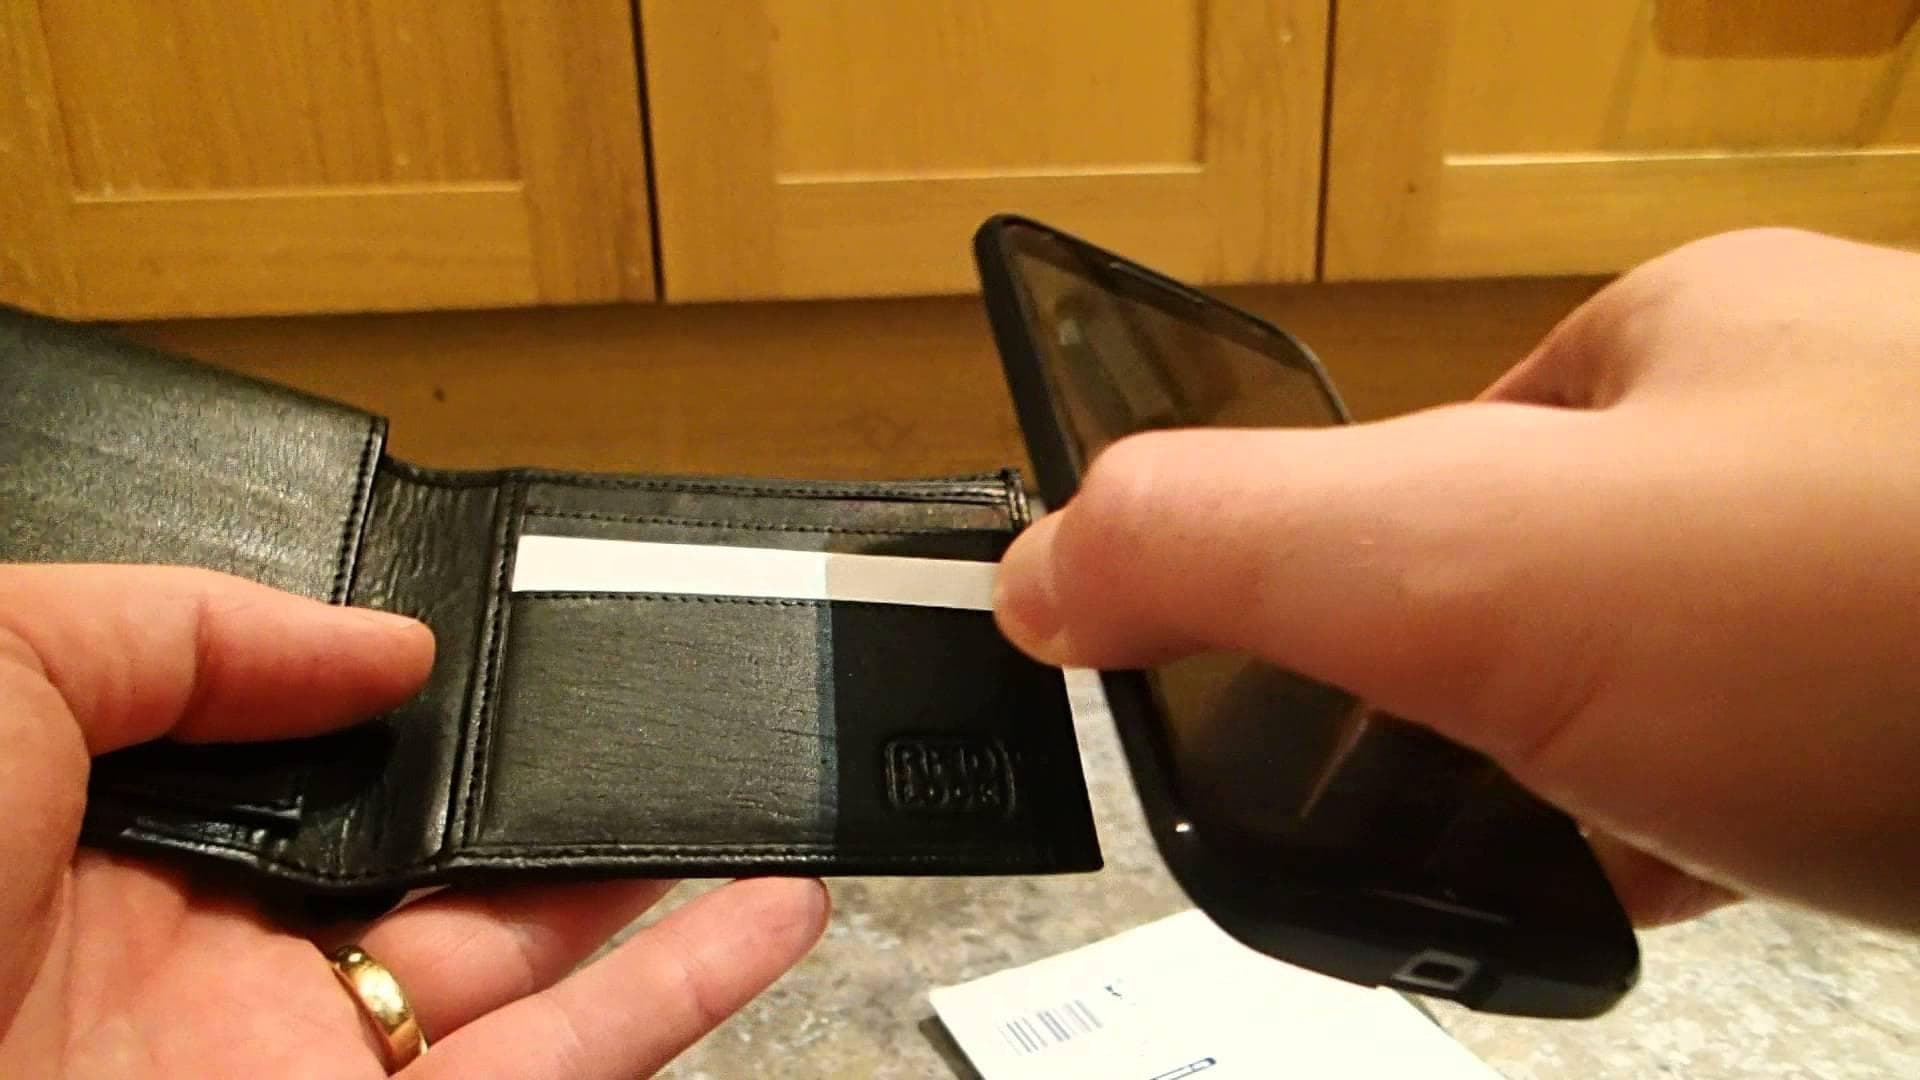 Personal Wallet Review